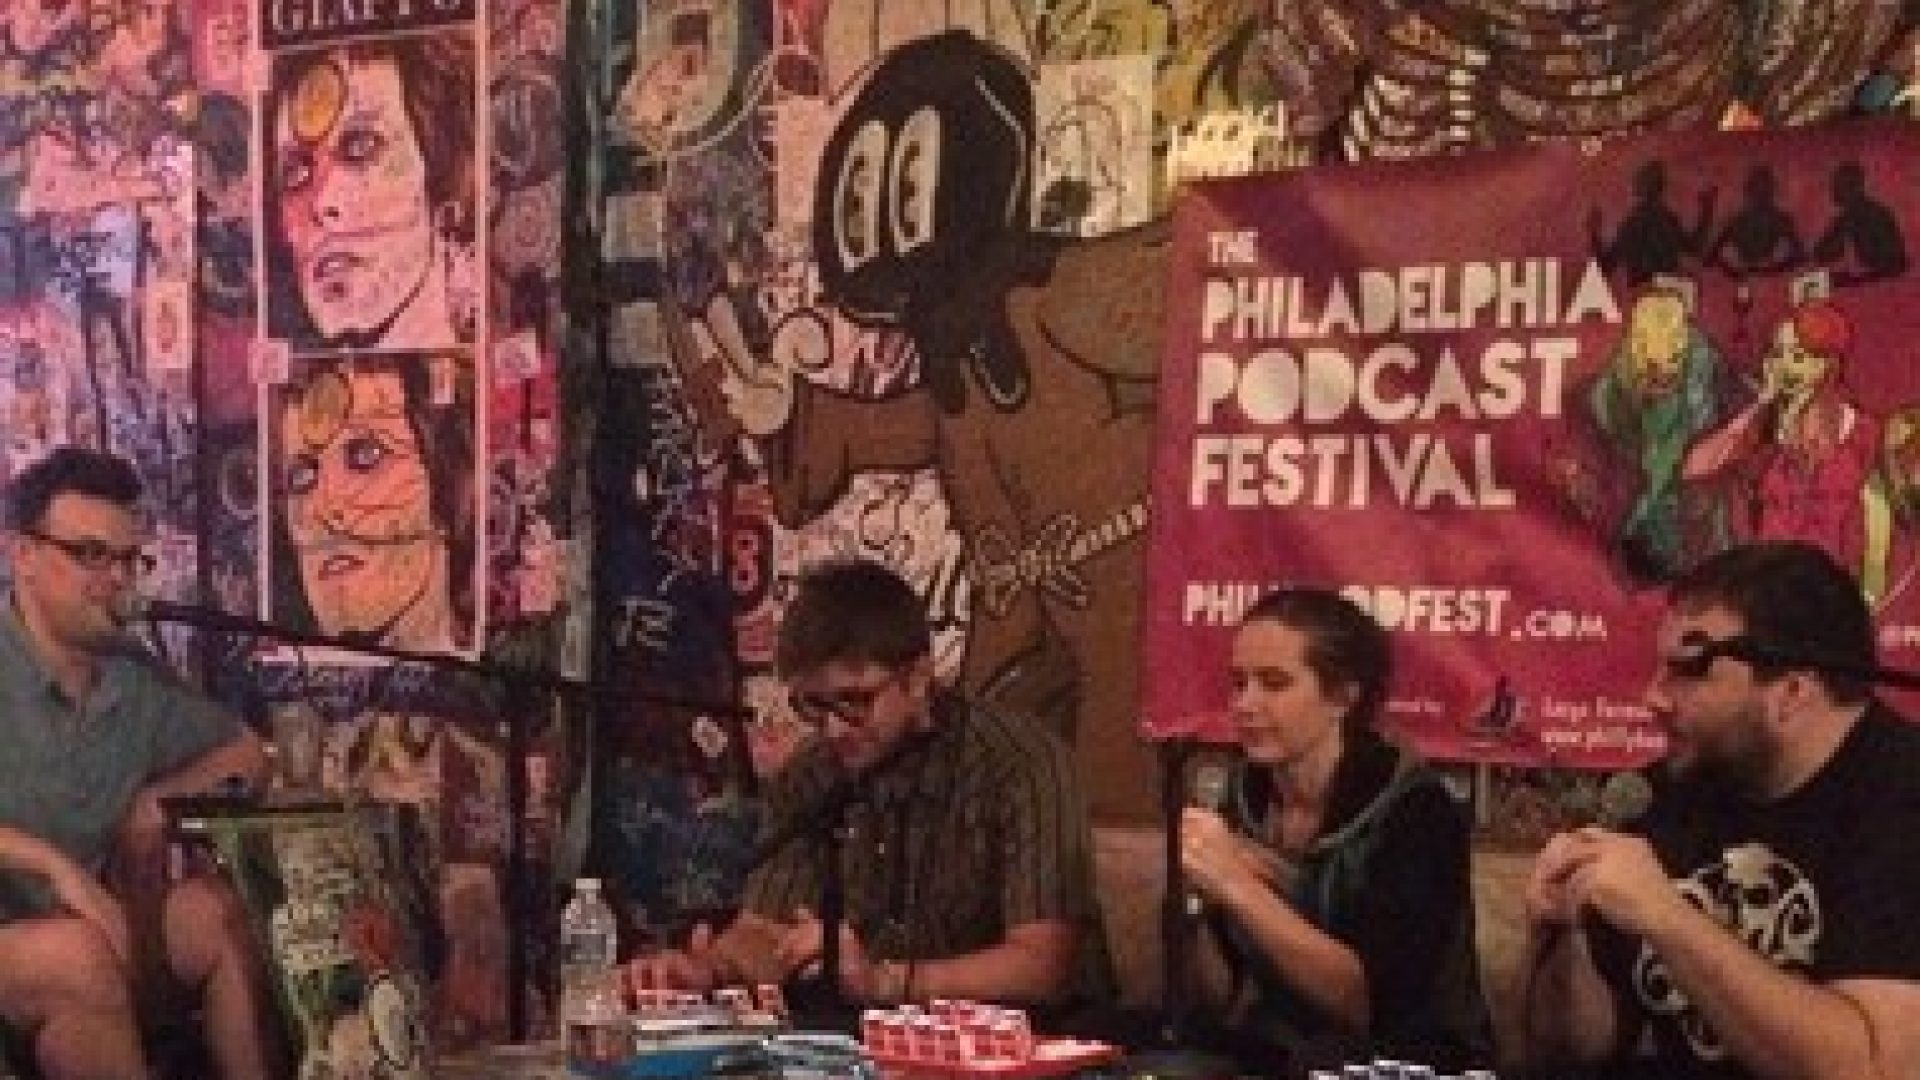 full belly laughs podcast episode 34 shake shack bolo ties philly podcast festival live audio artwork